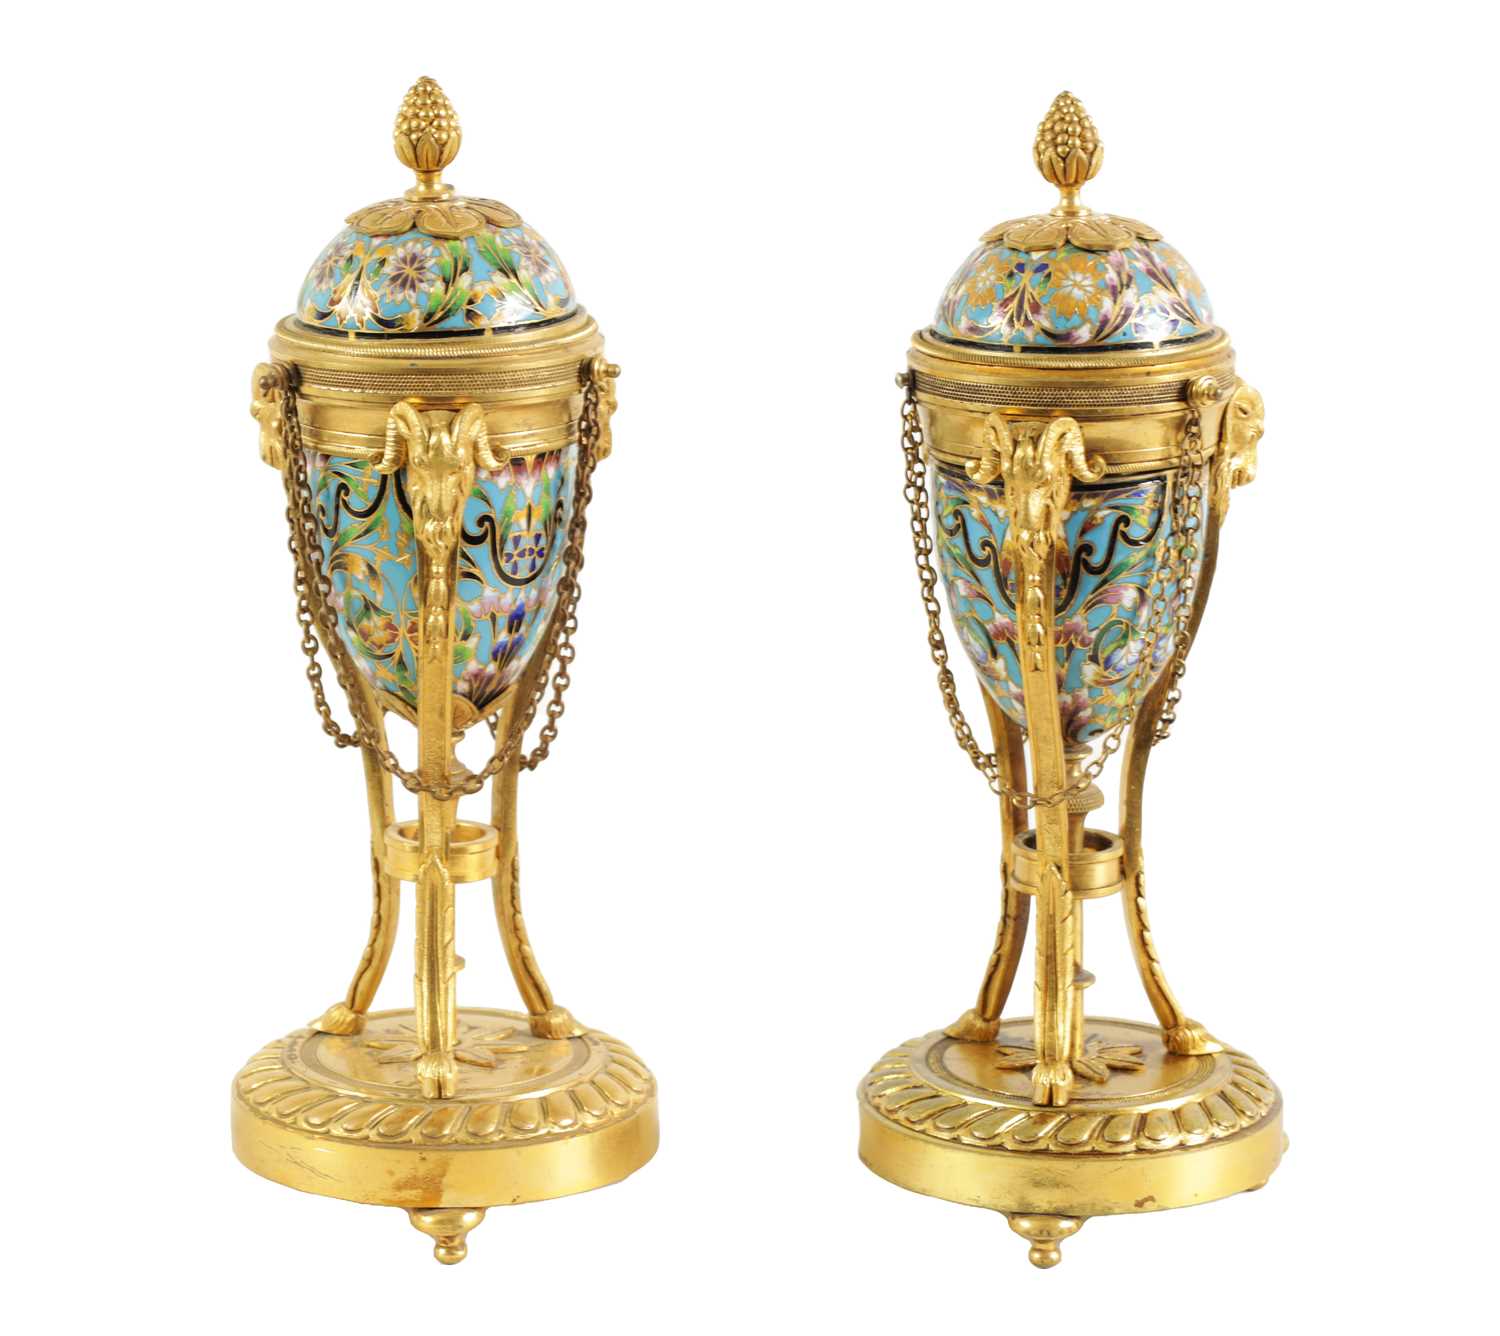 Lot 432 - A PAIR OF LATE 19TH CENTURY FRENCH ORMOLU AND CHAMPLEVE ENAMEL  CASSOLETTES